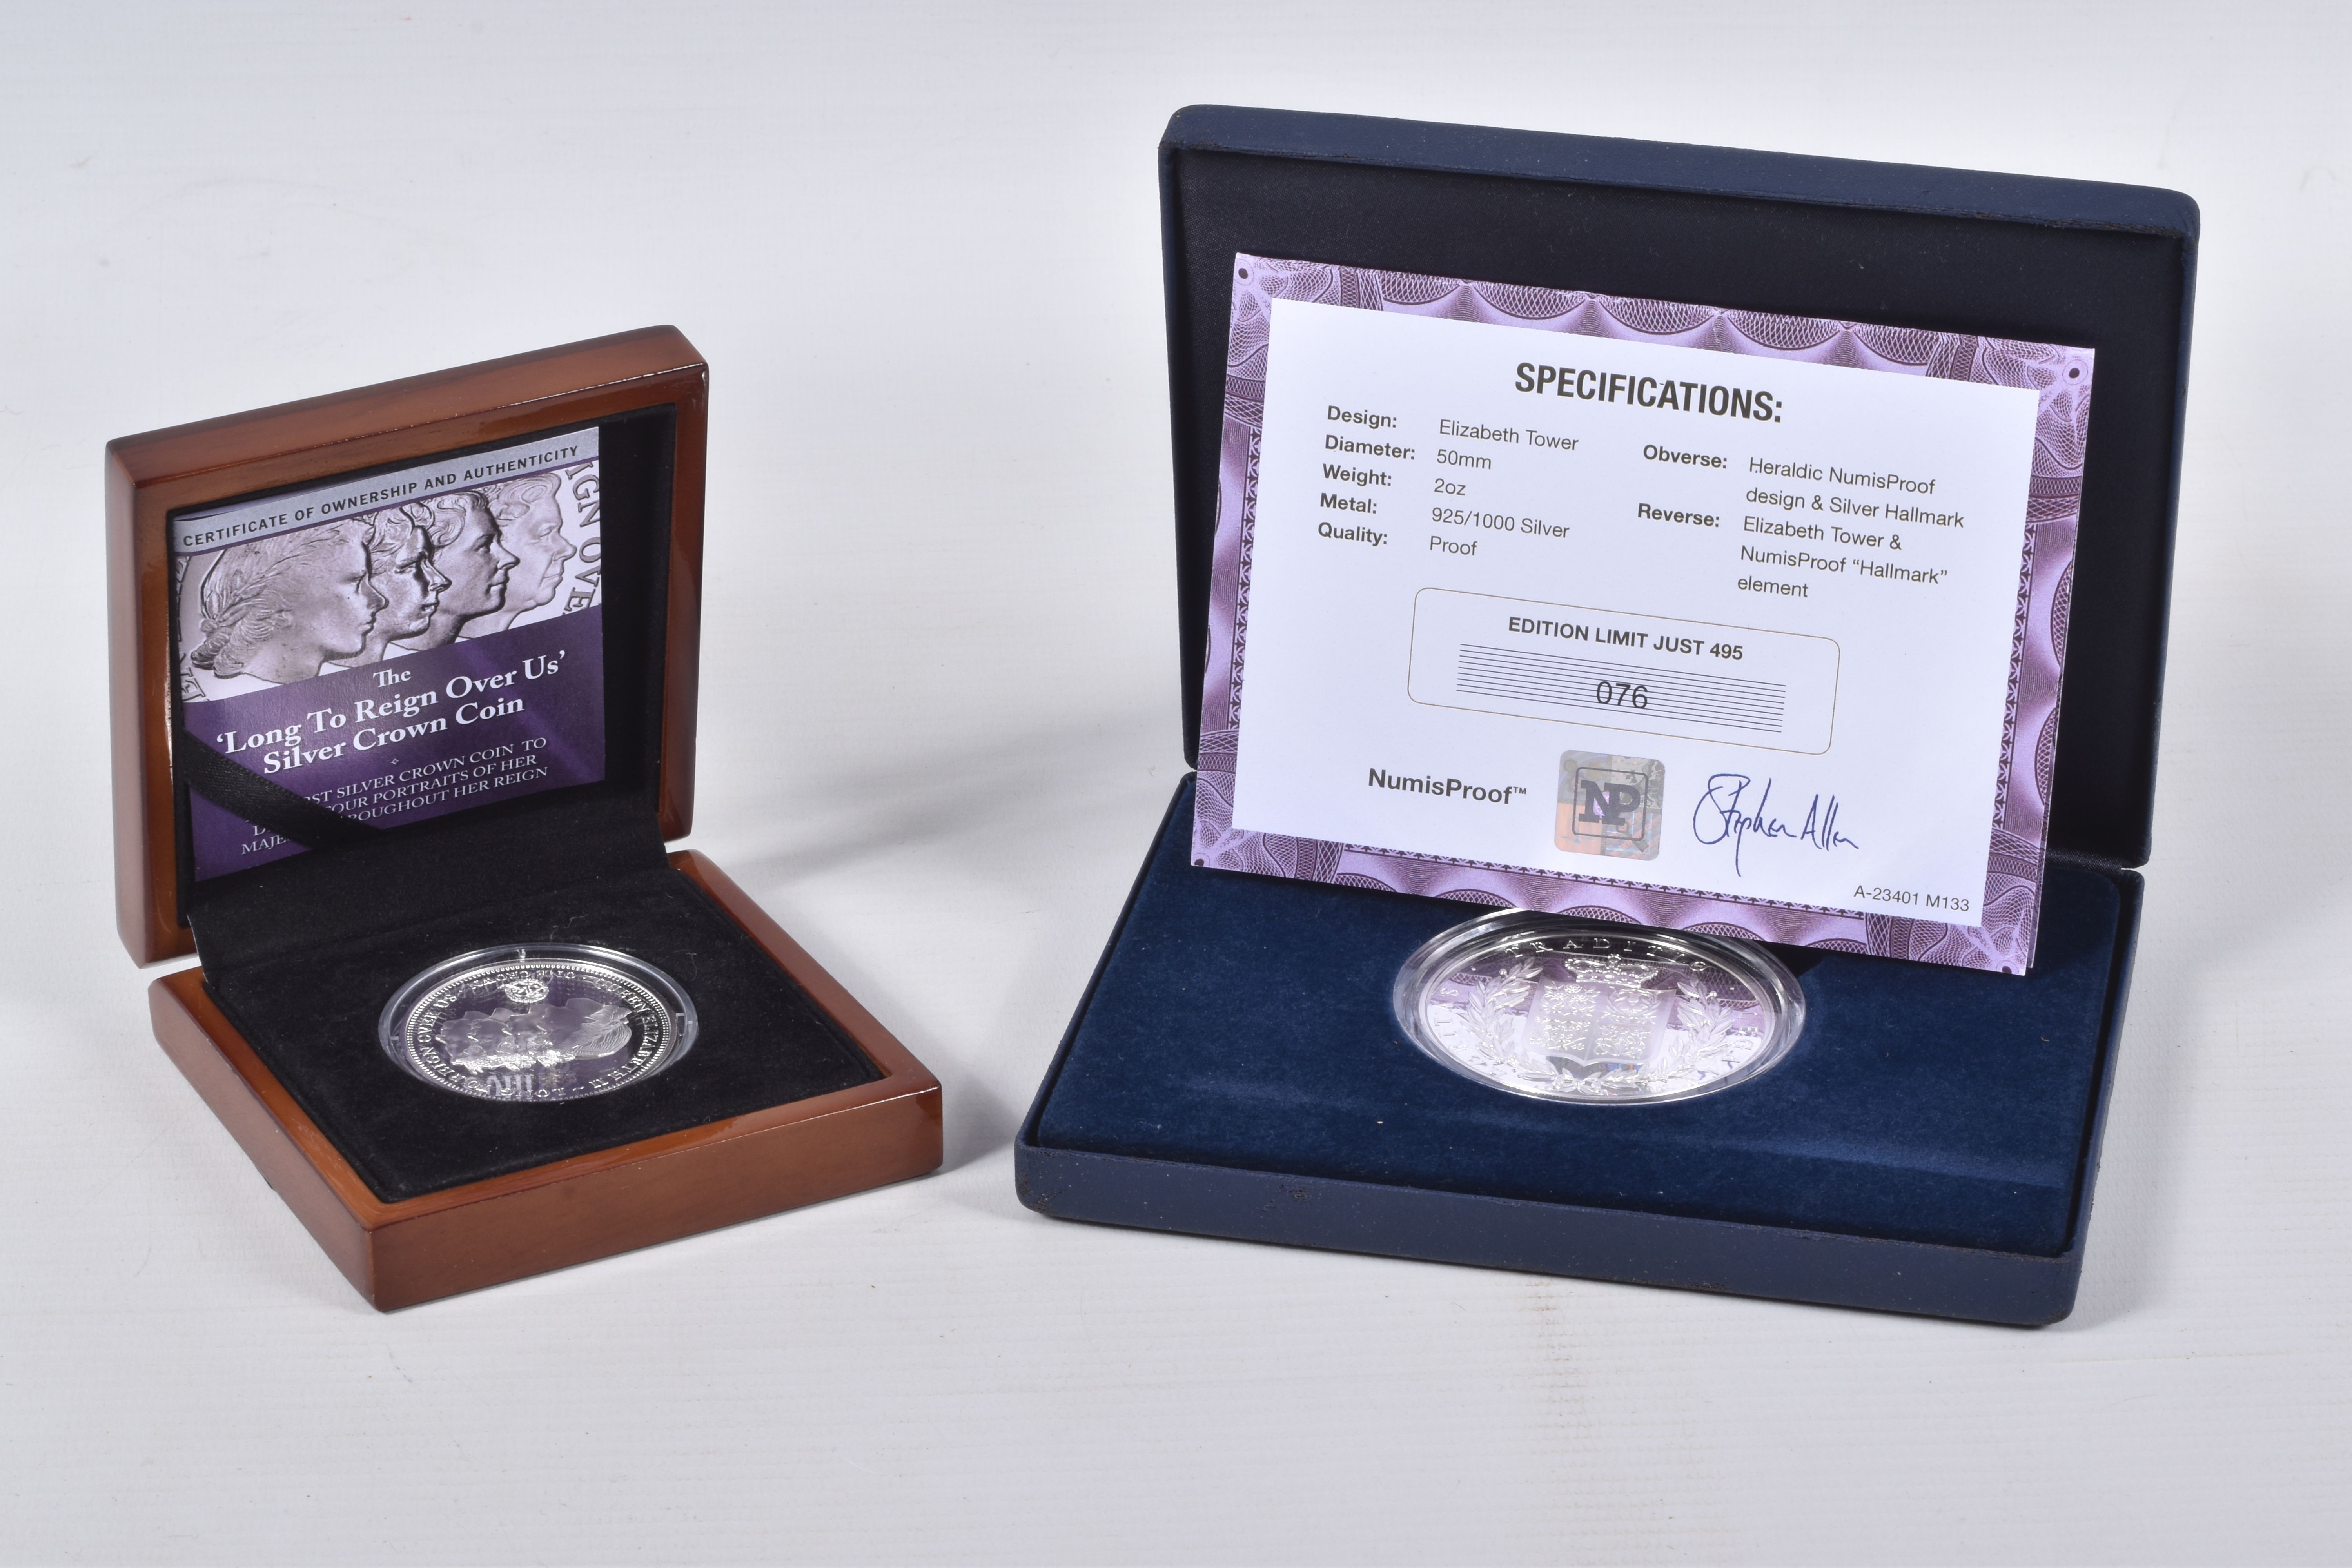 A 2012 SILVER PROOF .925 RENAMED THE ELIZABETH TOWER (Big Ben Clock Tower) 2oz Numisproof box and